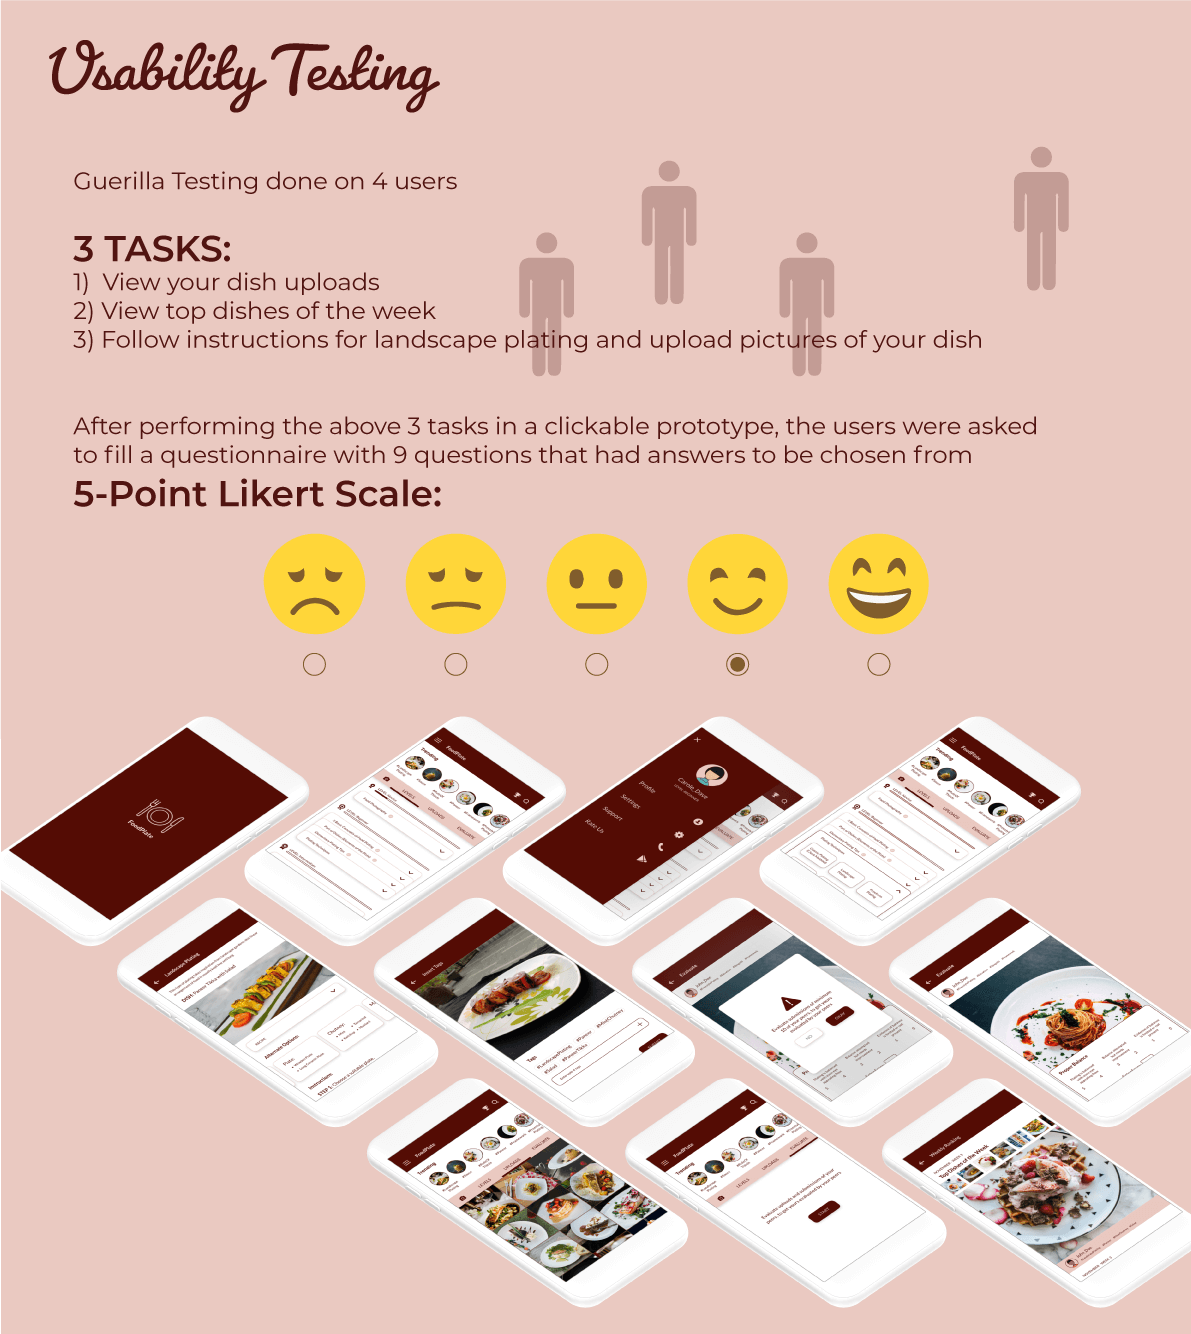 Instructional Design food plating BLOOM'S TAXONOMY ux/ui design Mobile Application cooking food photography wireframes user interface online questionnaire